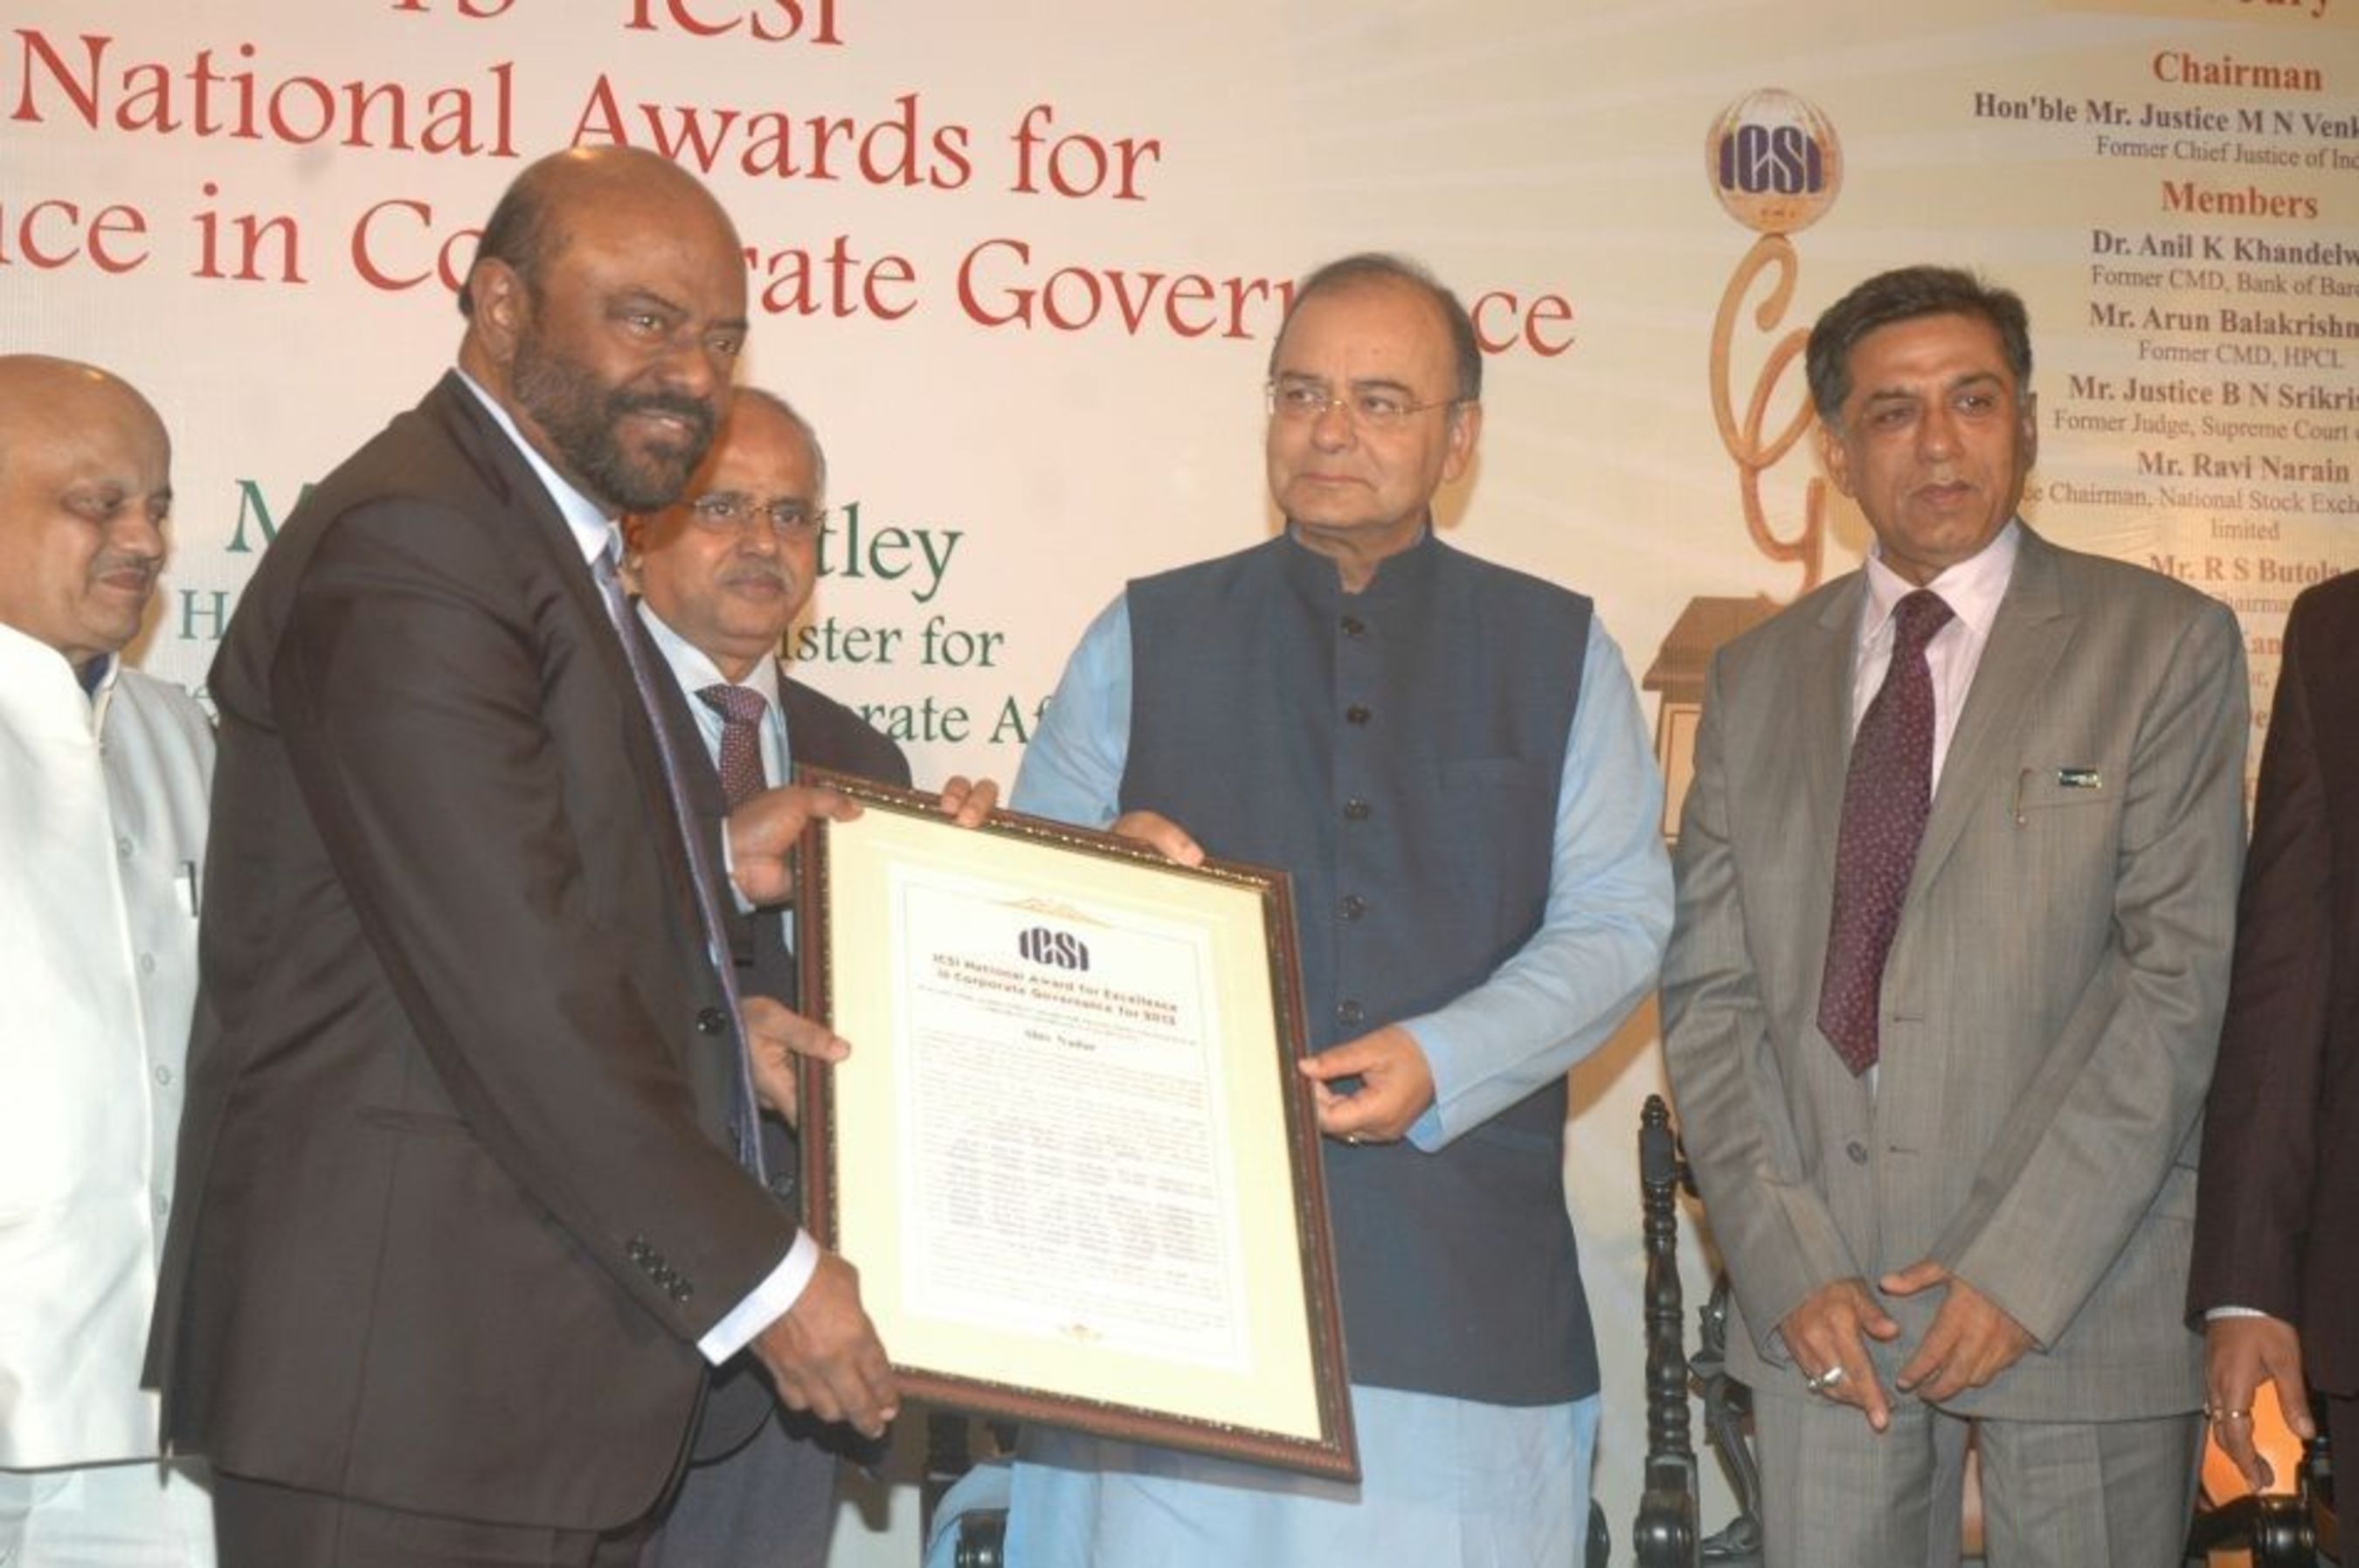 Shri Arun Jaitley, Hon'ble Union Minister for Finance, Defence and Corporate Affairs presenting the award to Shiv Nadar (PRNewsFoto/HCL Technologies Ltd)